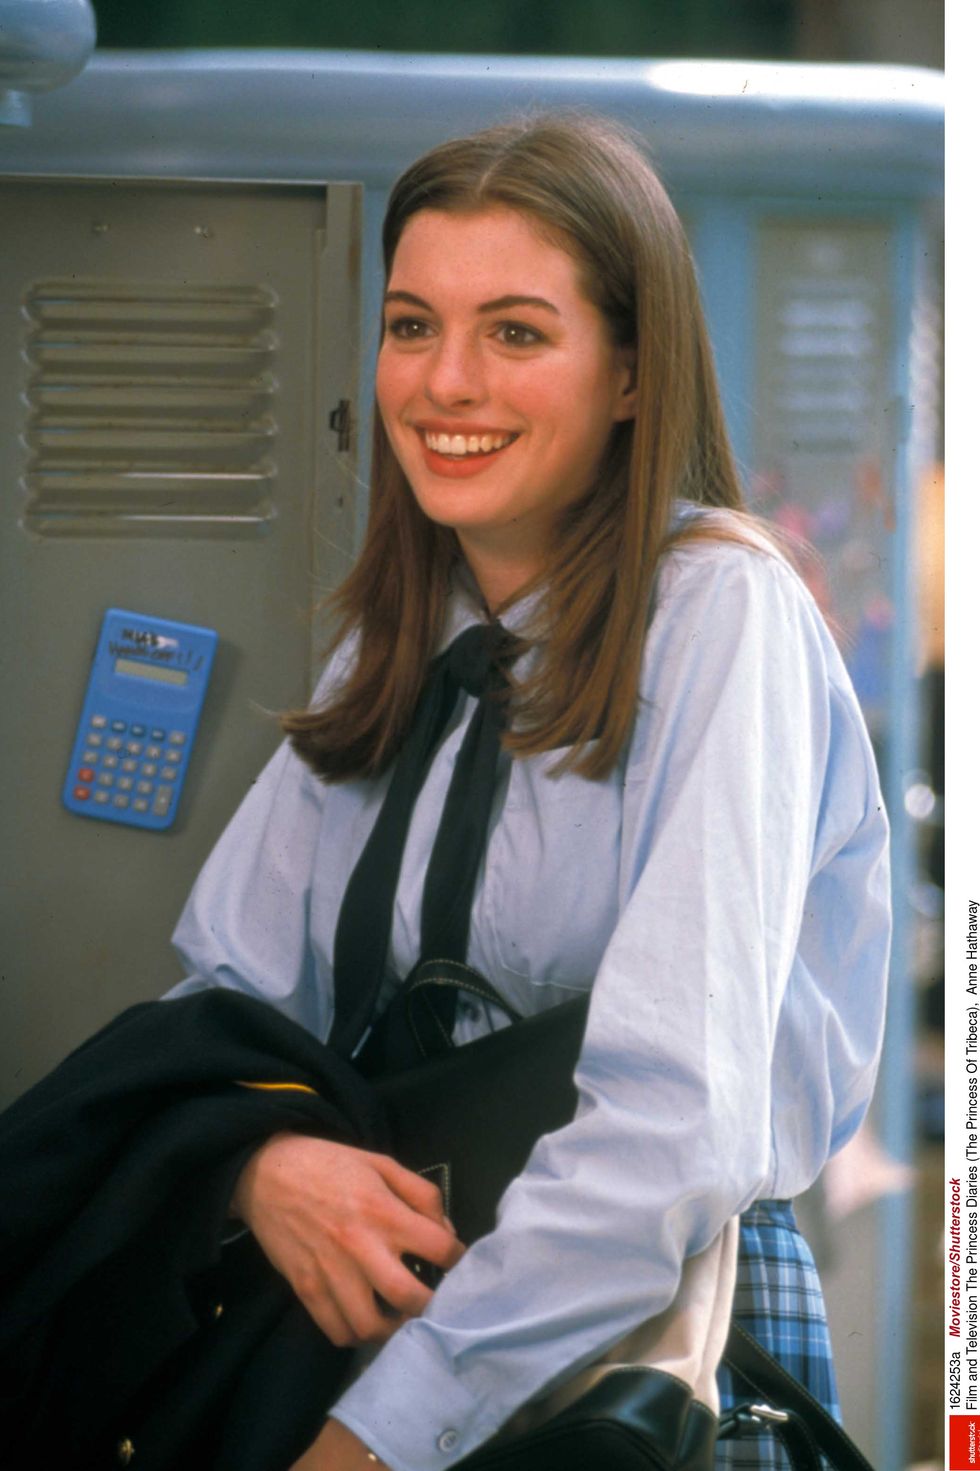 editorial use only no book cover usage mandatory credit photo by moviestoreshutterstock 1624253a the princess diaries the princess of tribeca, anne hathaway film and television